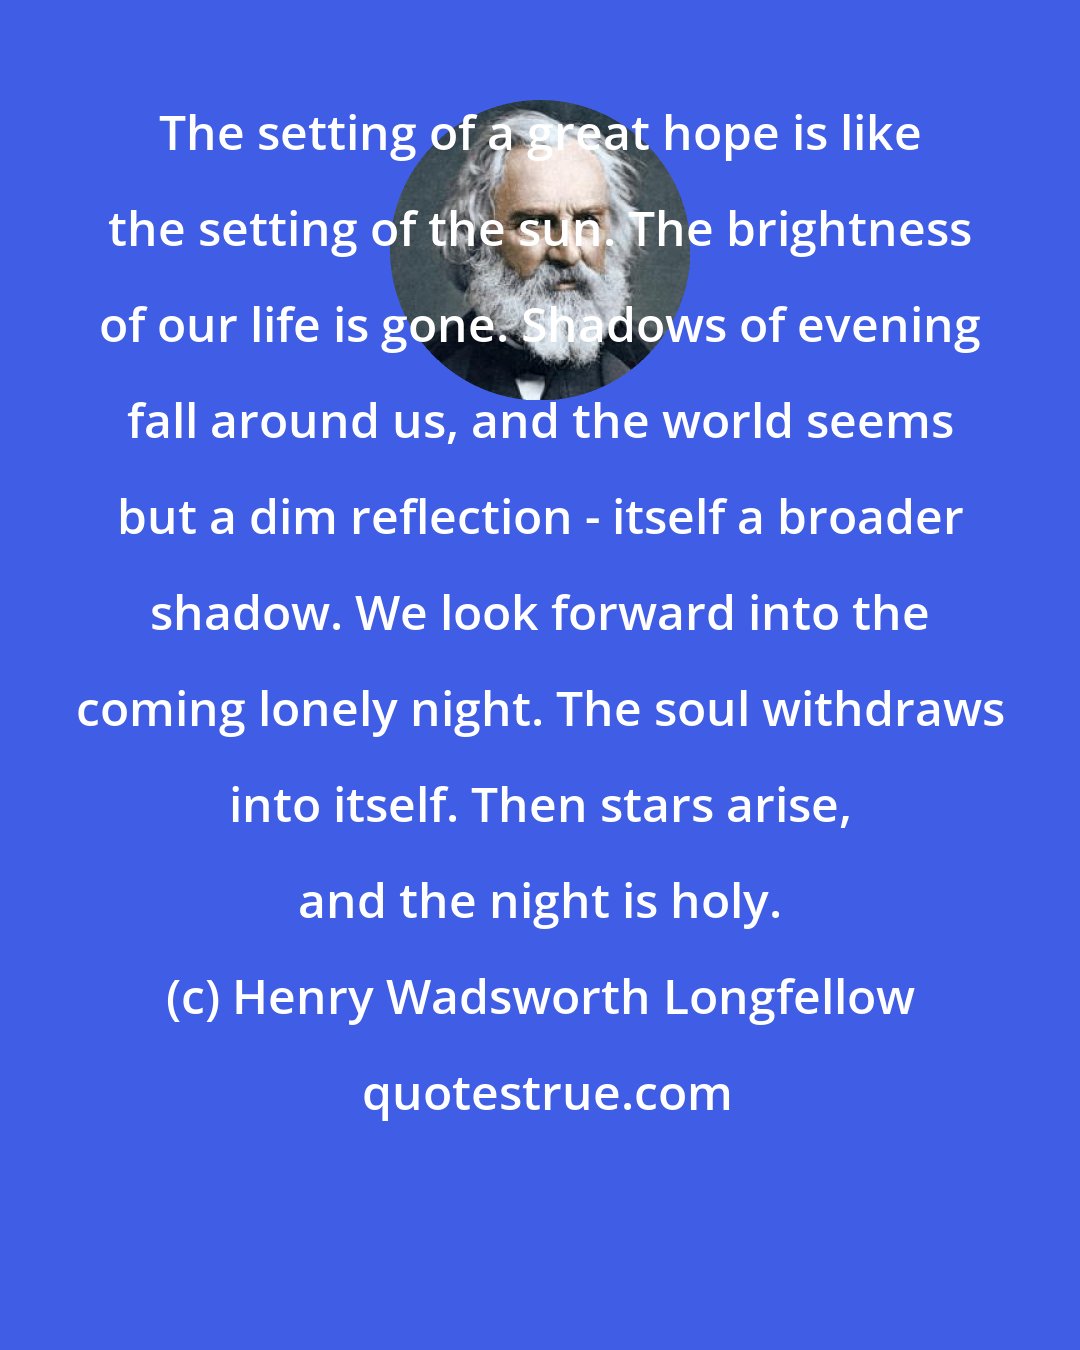 Henry Wadsworth Longfellow: The setting of a great hope is like the setting of the sun. The brightness of our life is gone. Shadows of evening fall around us, and the world seems but a dim reflection - itself a broader shadow. We look forward into the coming lonely night. The soul withdraws into itself. Then stars arise, and the night is holy.